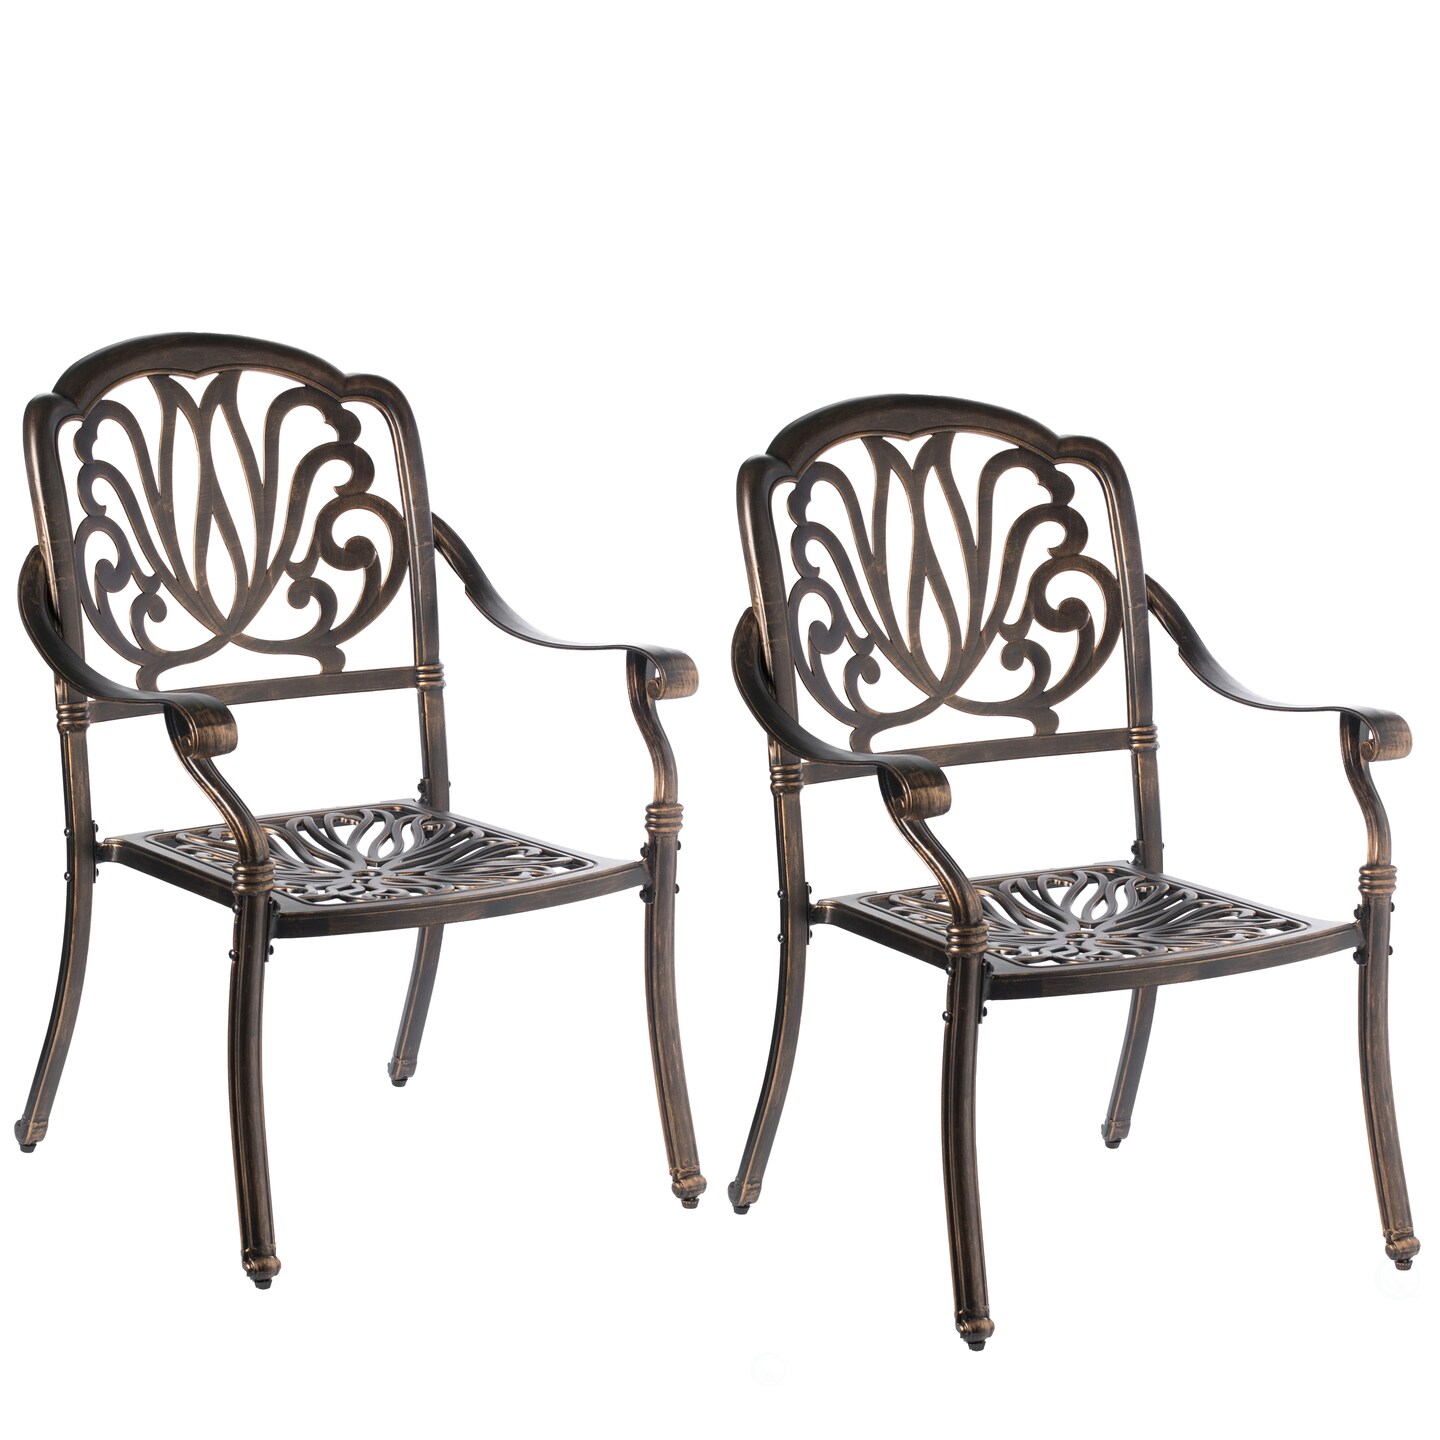 Indoor and Outdoor Bronze Dinning Set 2 Chairs with 1 Table Patio Cast Aluminum.